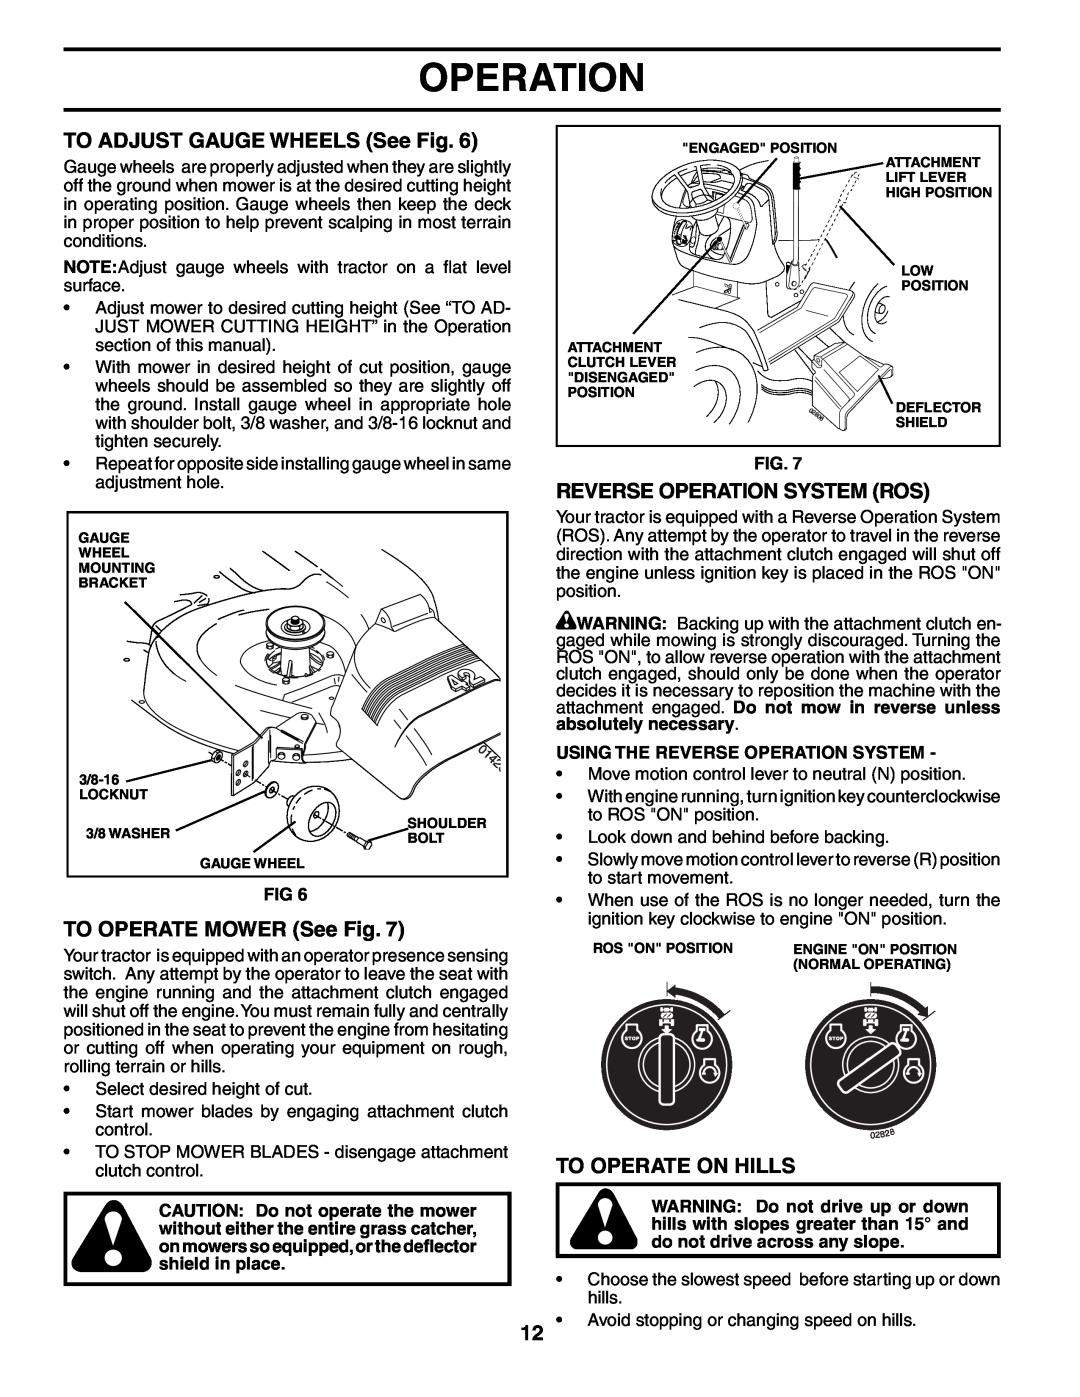 Poulan BB185H42YT manual TO ADJUST GAUGE WHEELS See Fig, TO OPERATE MOWER See Fig, Reverse Operation System Ros 